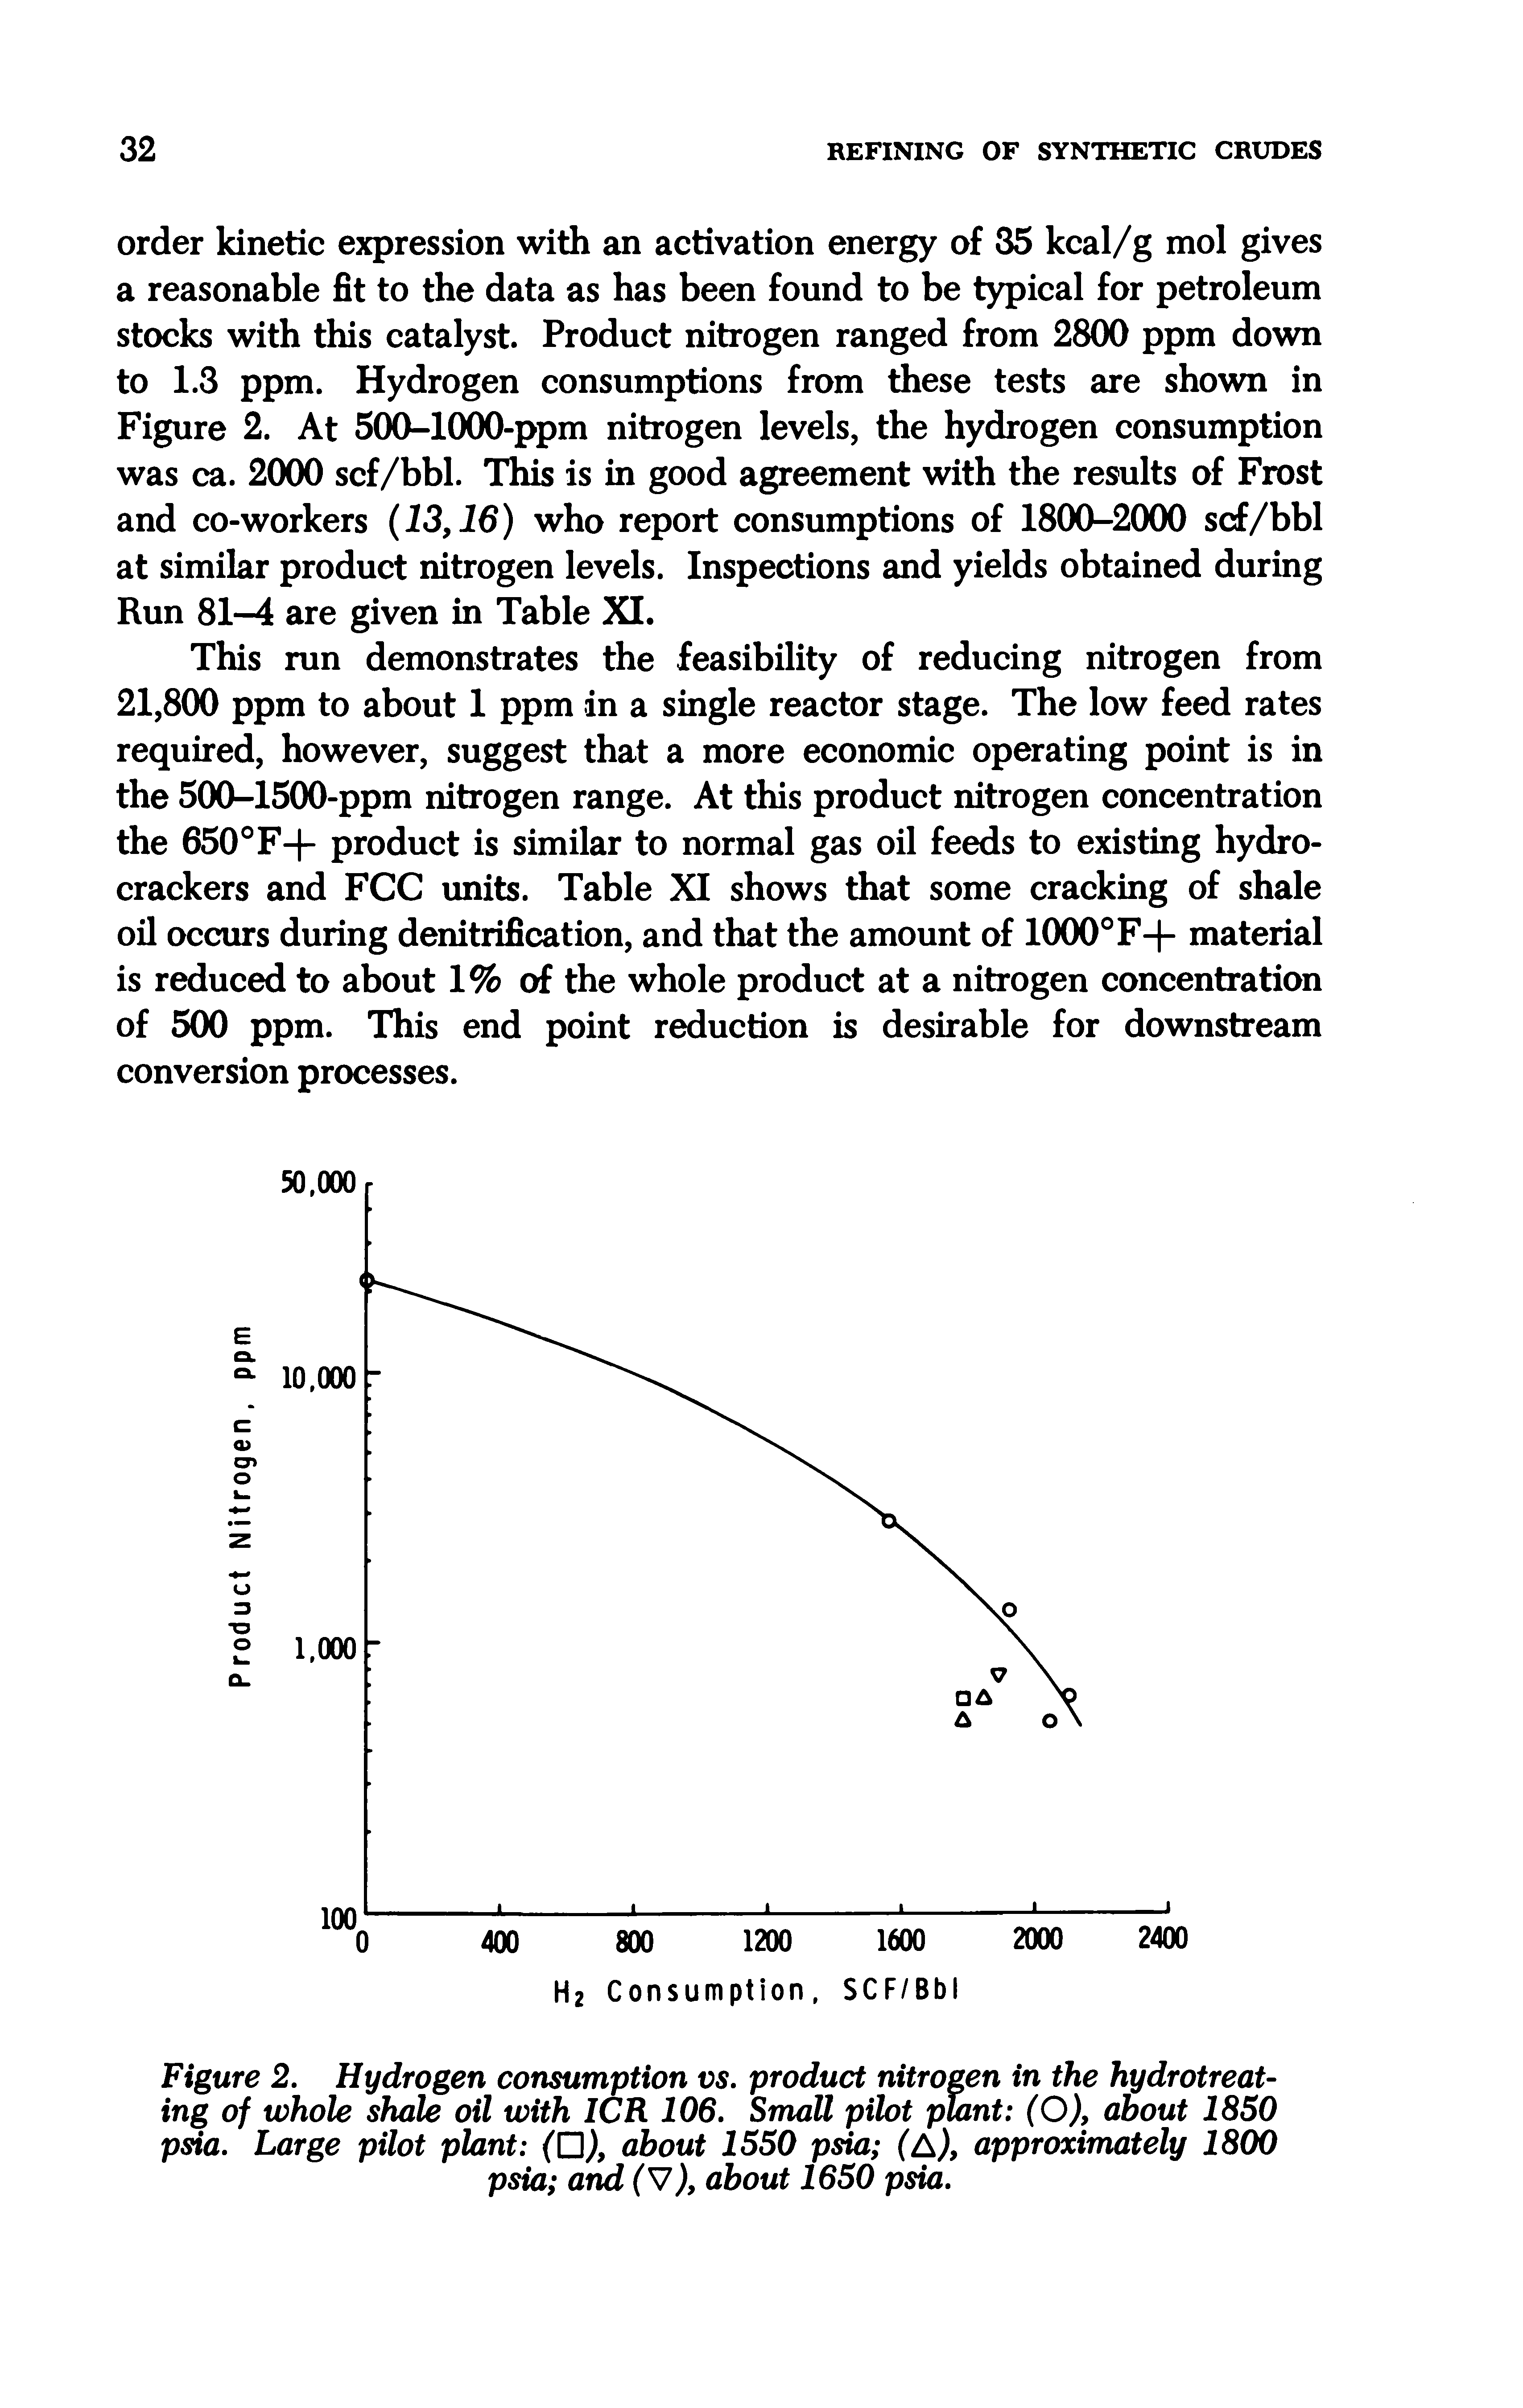 Figure 2. Hydrogen consumption vs. product nitrogen in the hydrotreating of whole shale oil with ICR 106. Small pilot plant (O), about 1850 psia. Large pilot plant (U), about 1550 psia (A, approximately 1800 psia and (V), about 1650 psia.